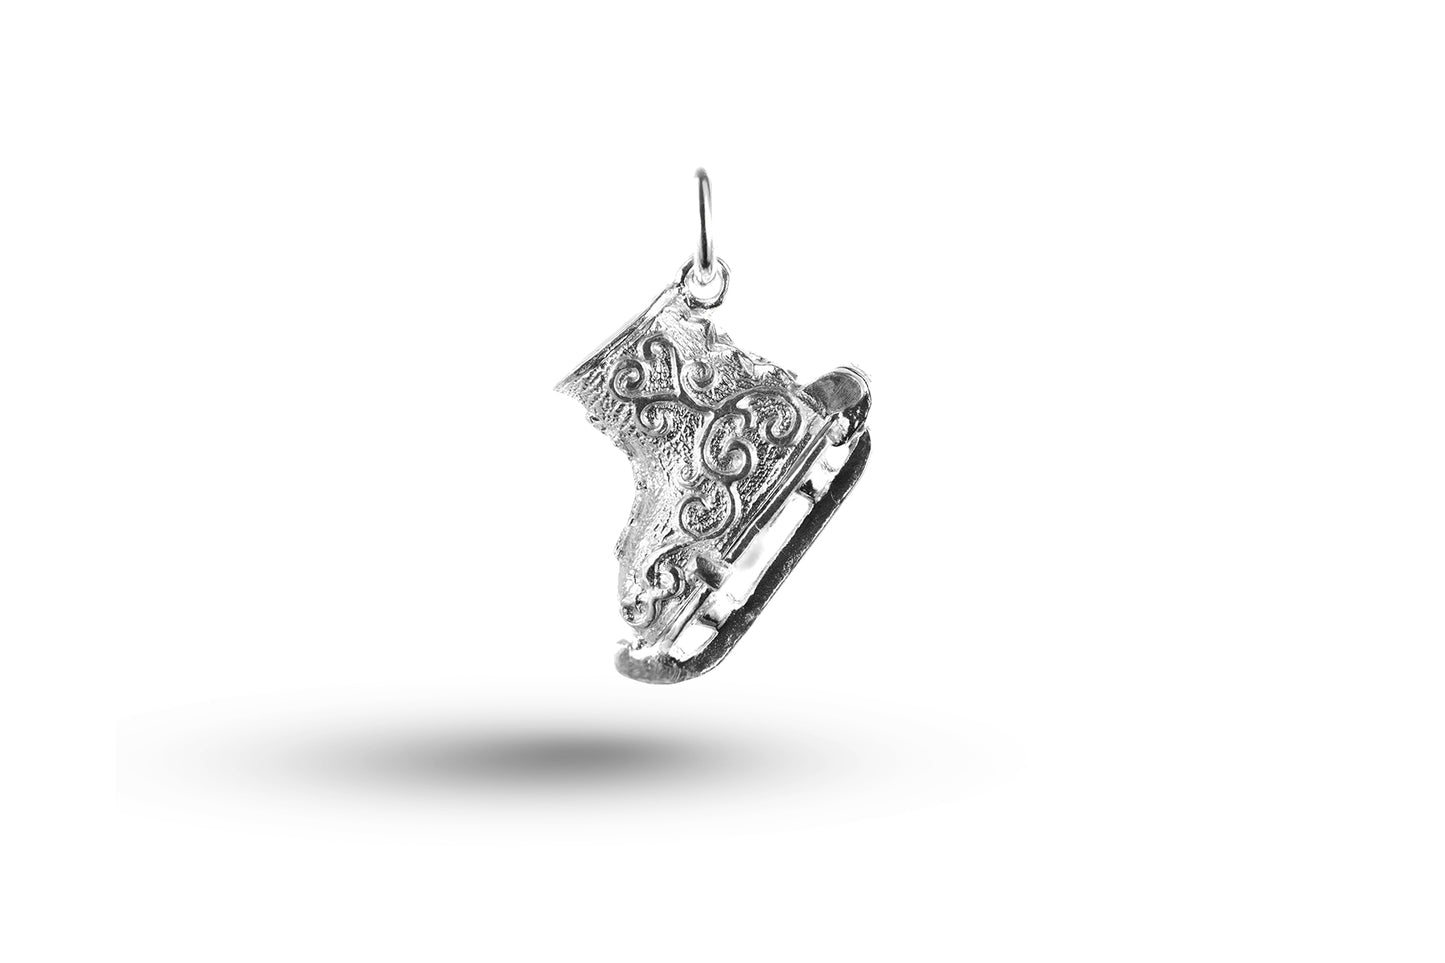 White gold Opening Ice Skate charm.